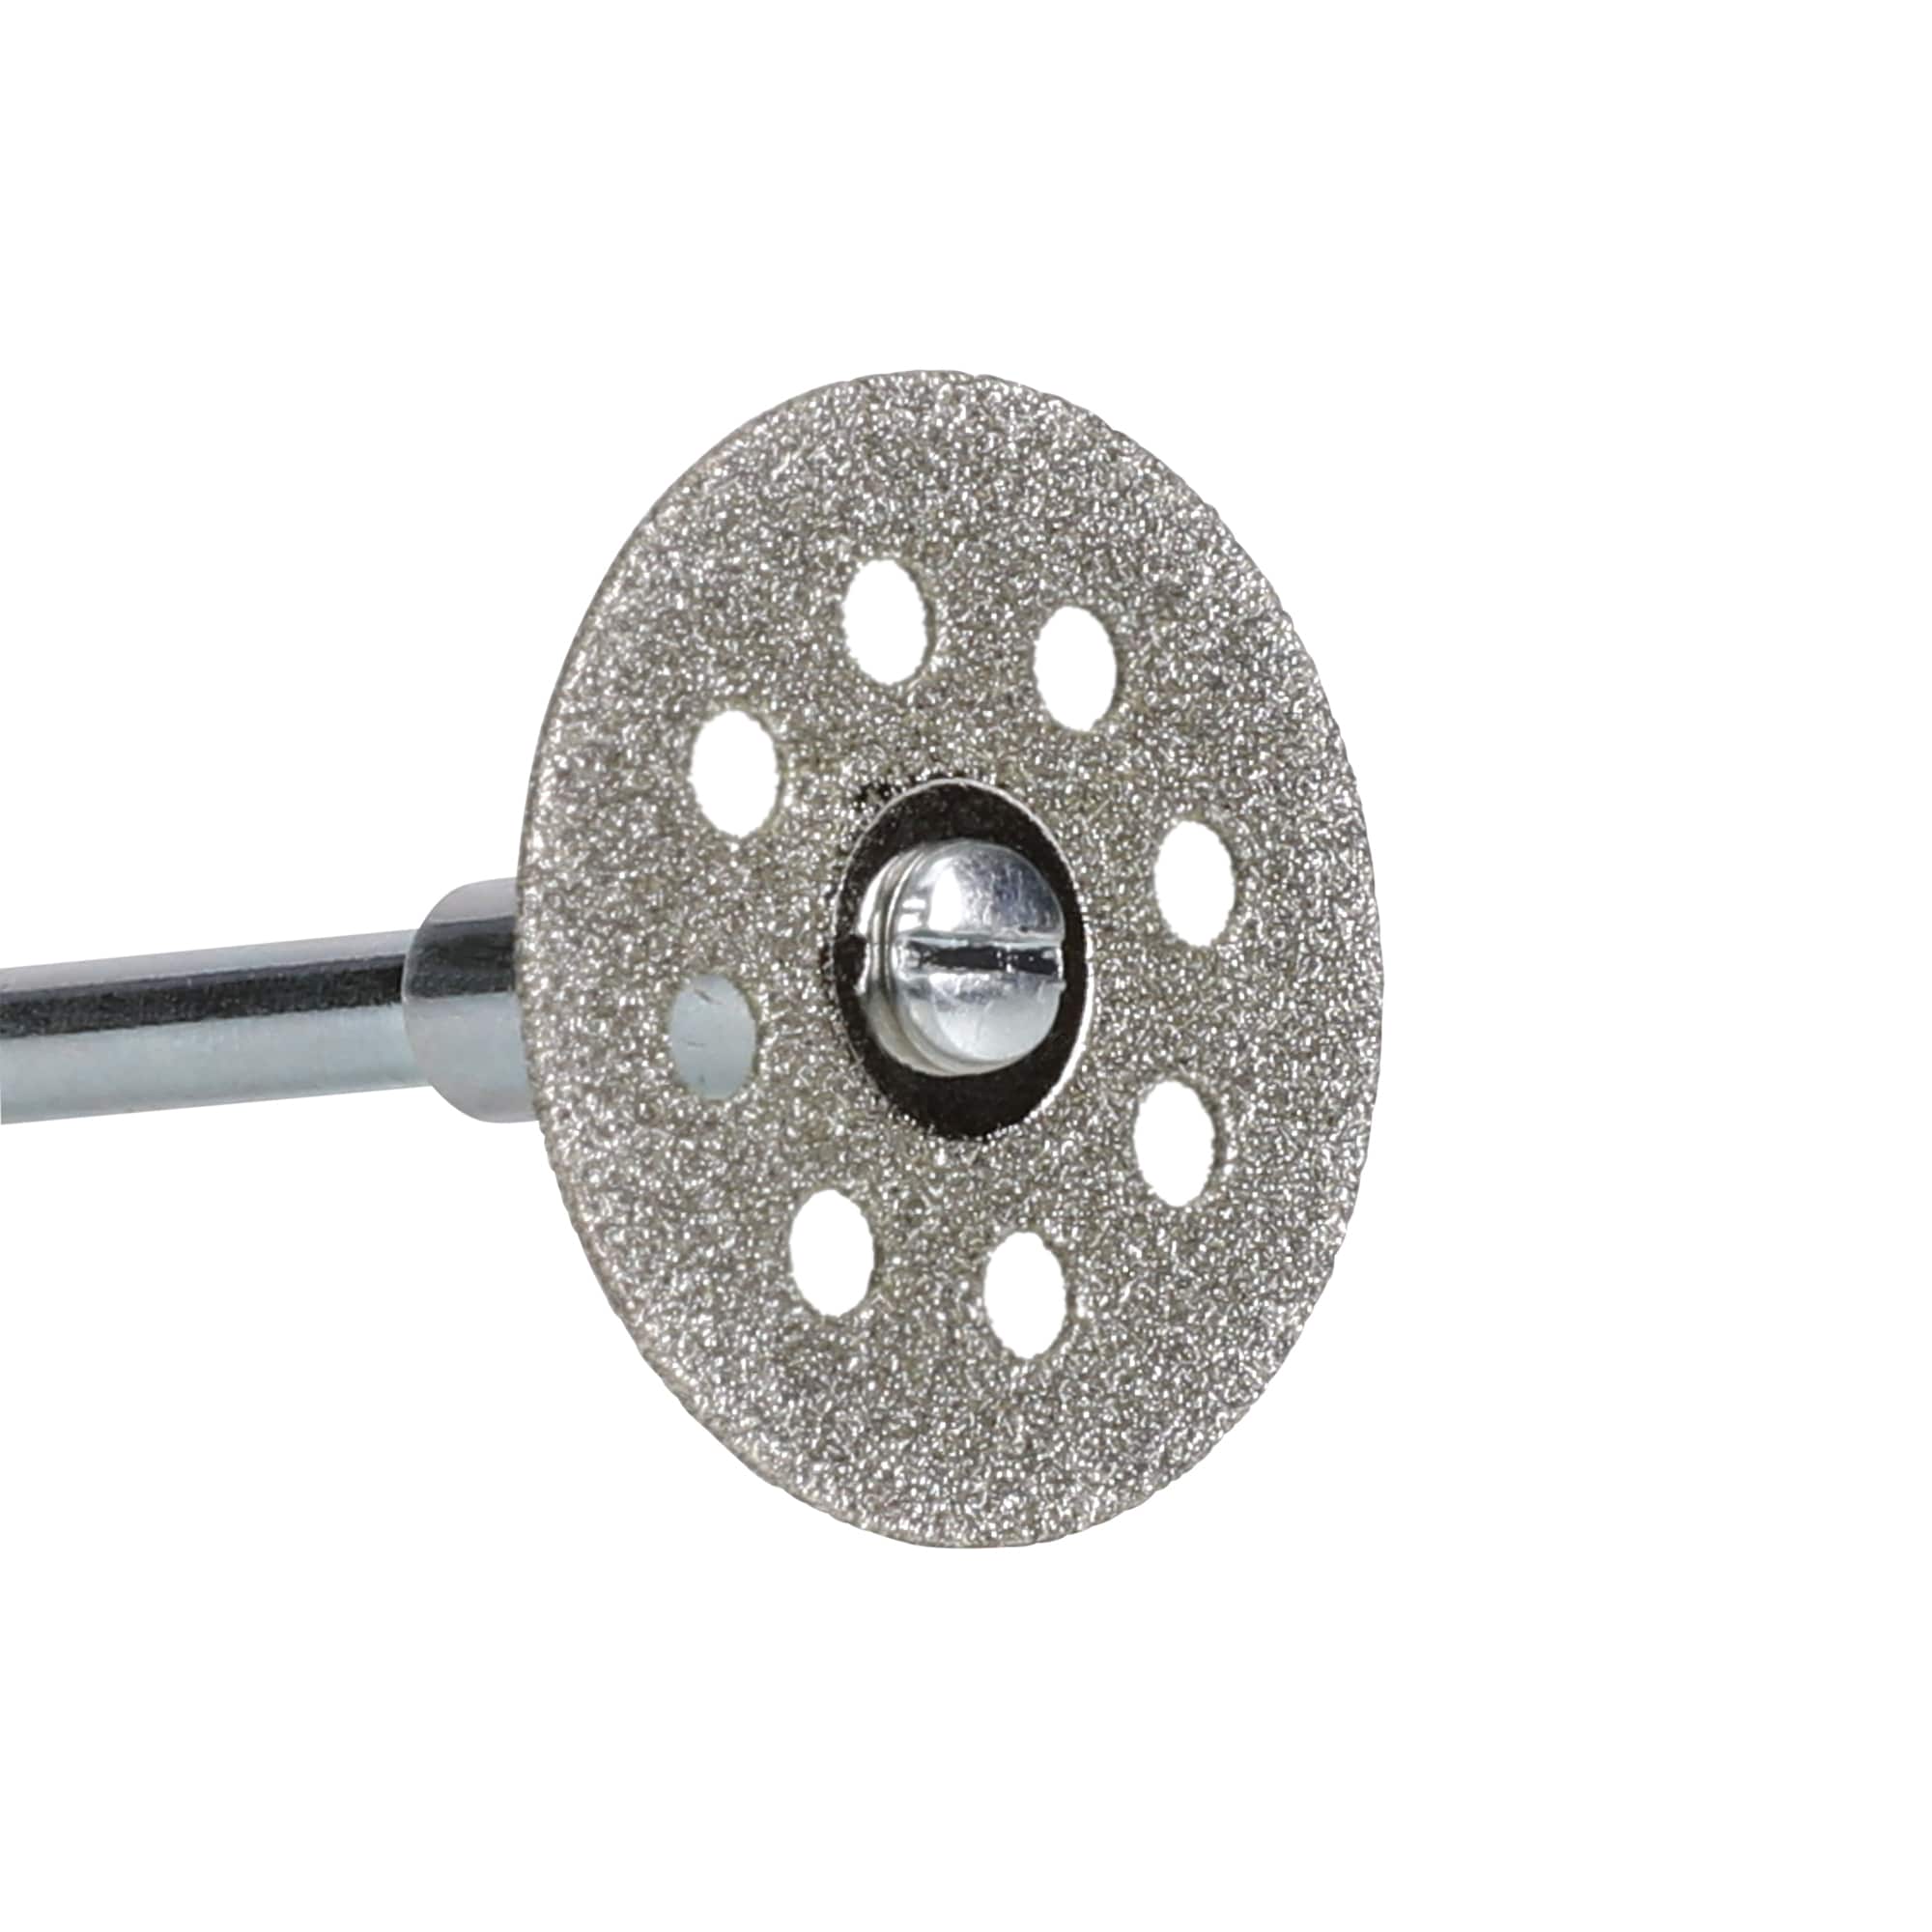 Dremel 545 Wheel Grit 1-in Cutting Wheel Accessory in the Rotary Tool Bits & department at Lowes.com